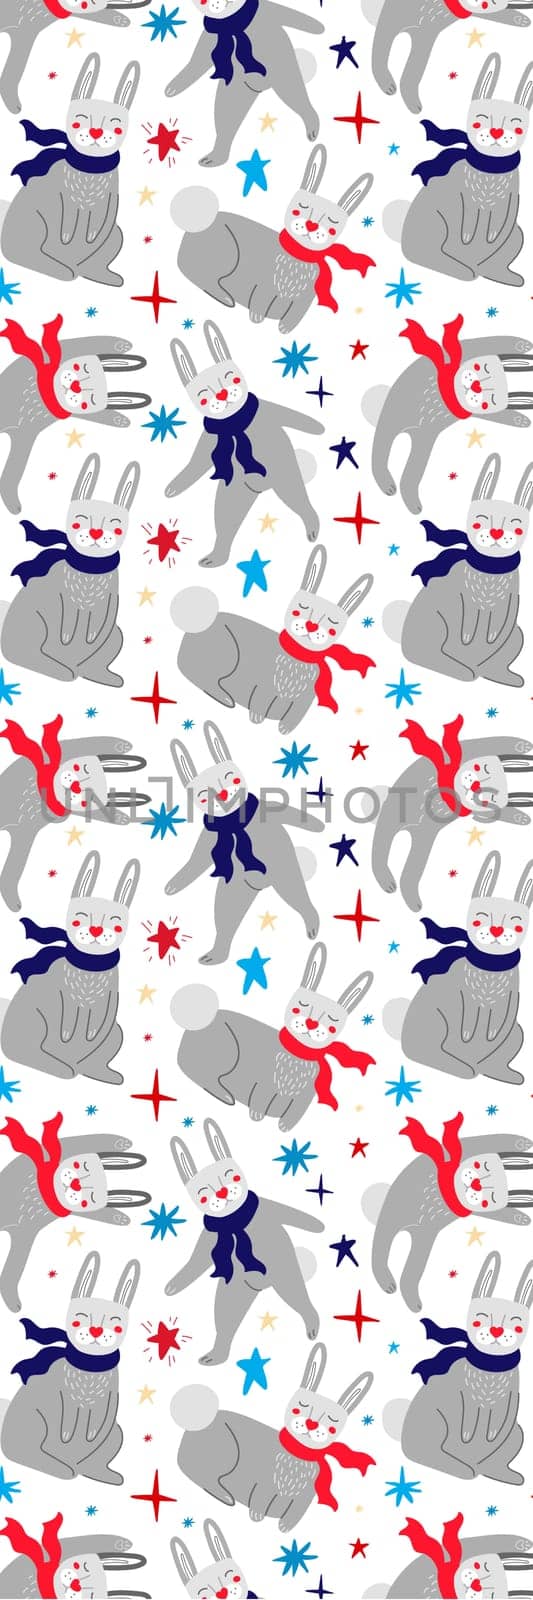 Gray Modern Funny Christmas Rabbits Bookmark by Dustick